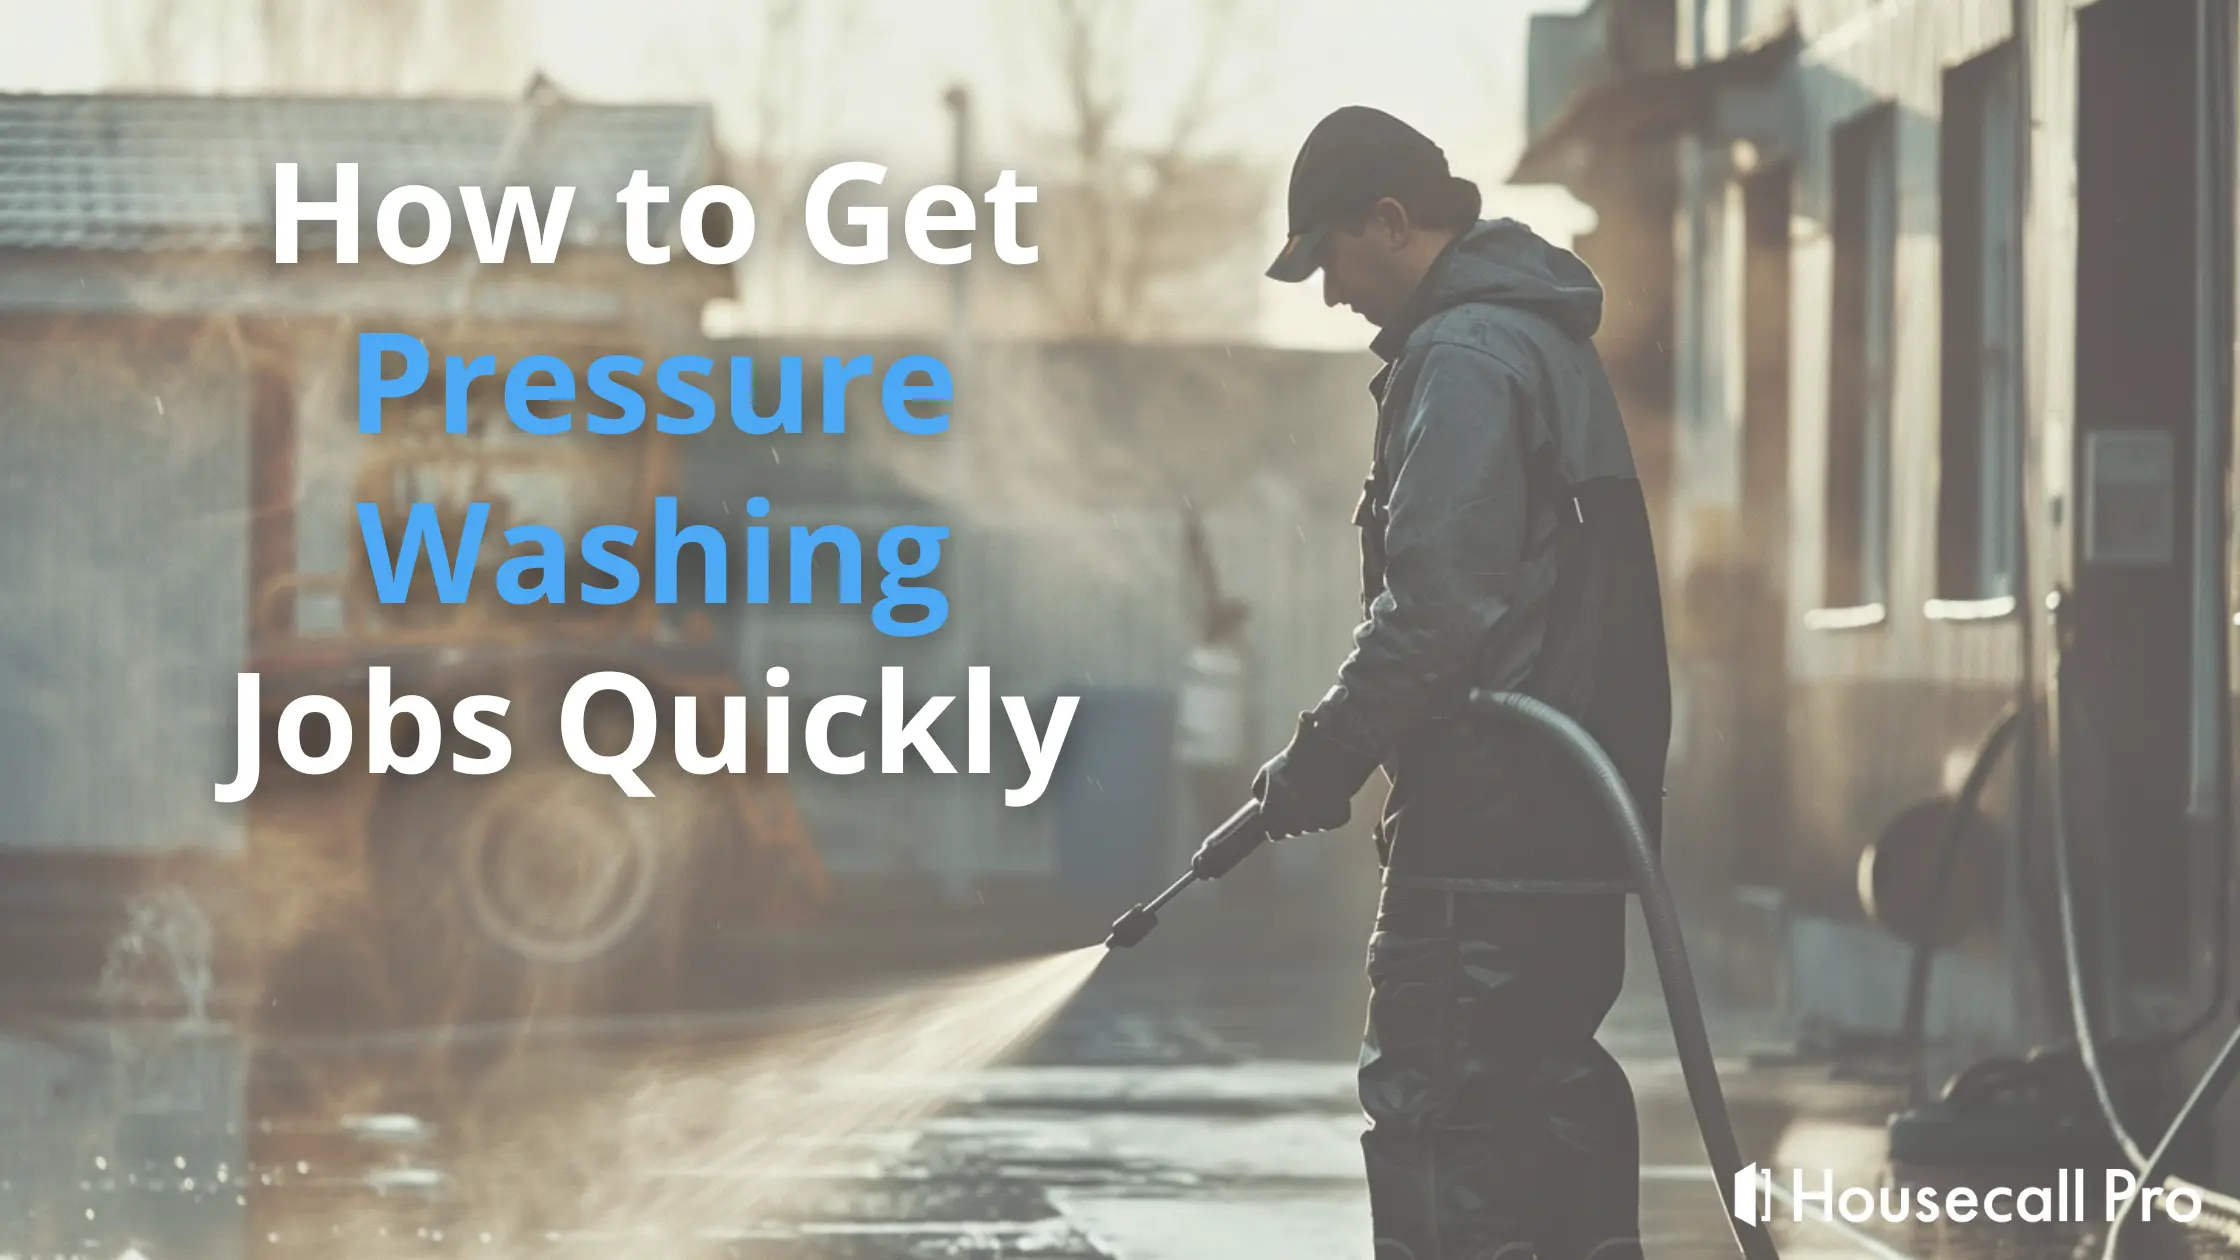 How to Get Pressure Washing Jobs Quickly